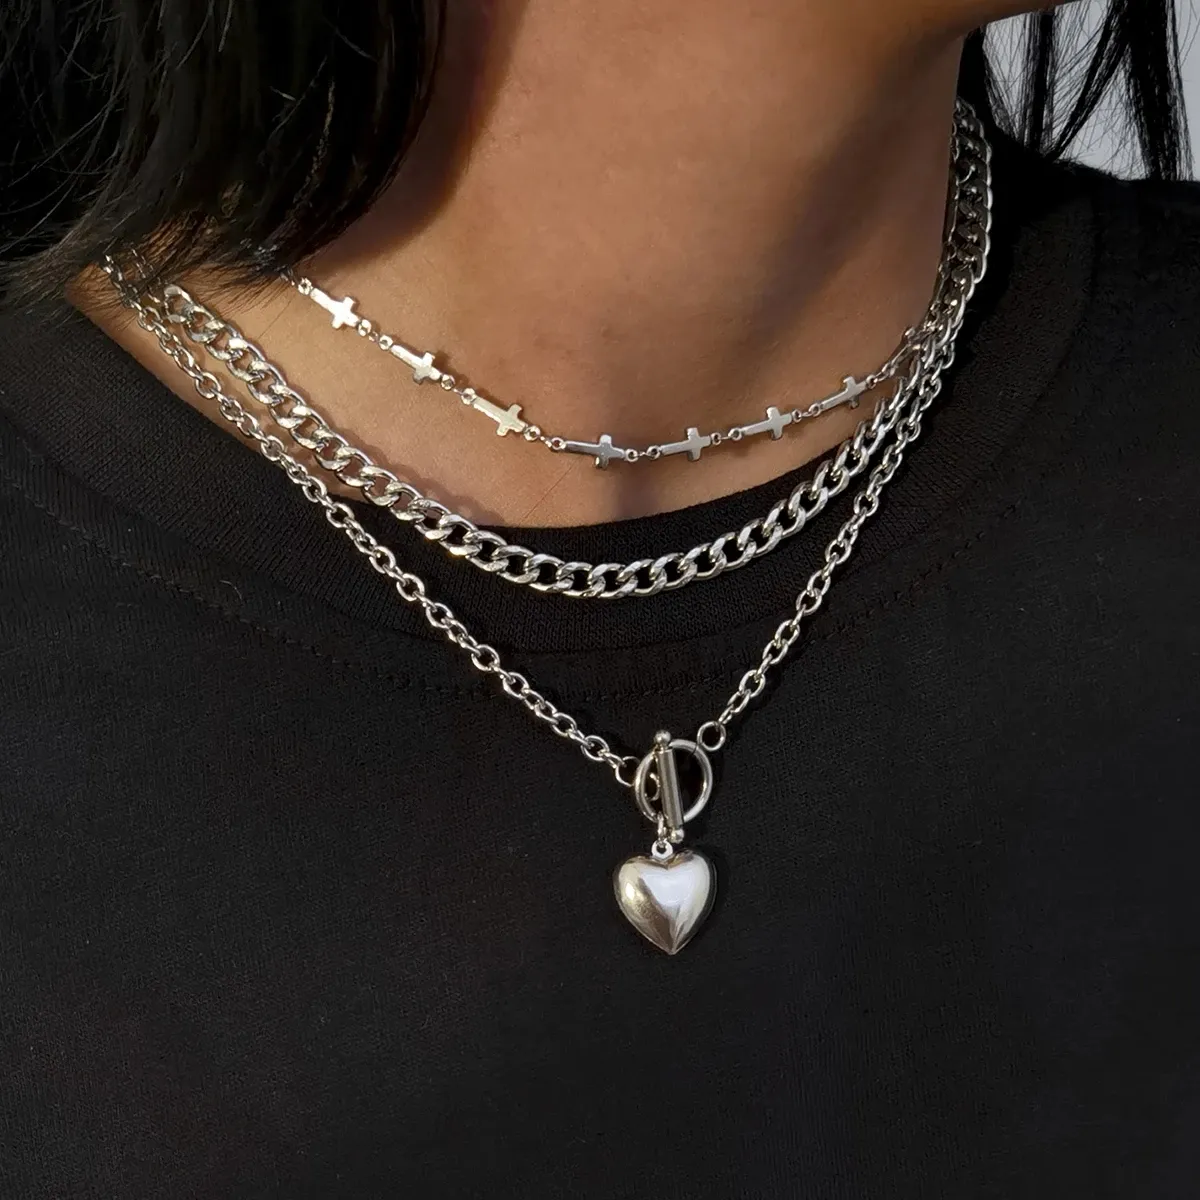 Multilayer Punk Stainless Steel Choker Necklace for Women Men Cross Jesus Chain Necklaces Vintage Heart Pendant Jewelry